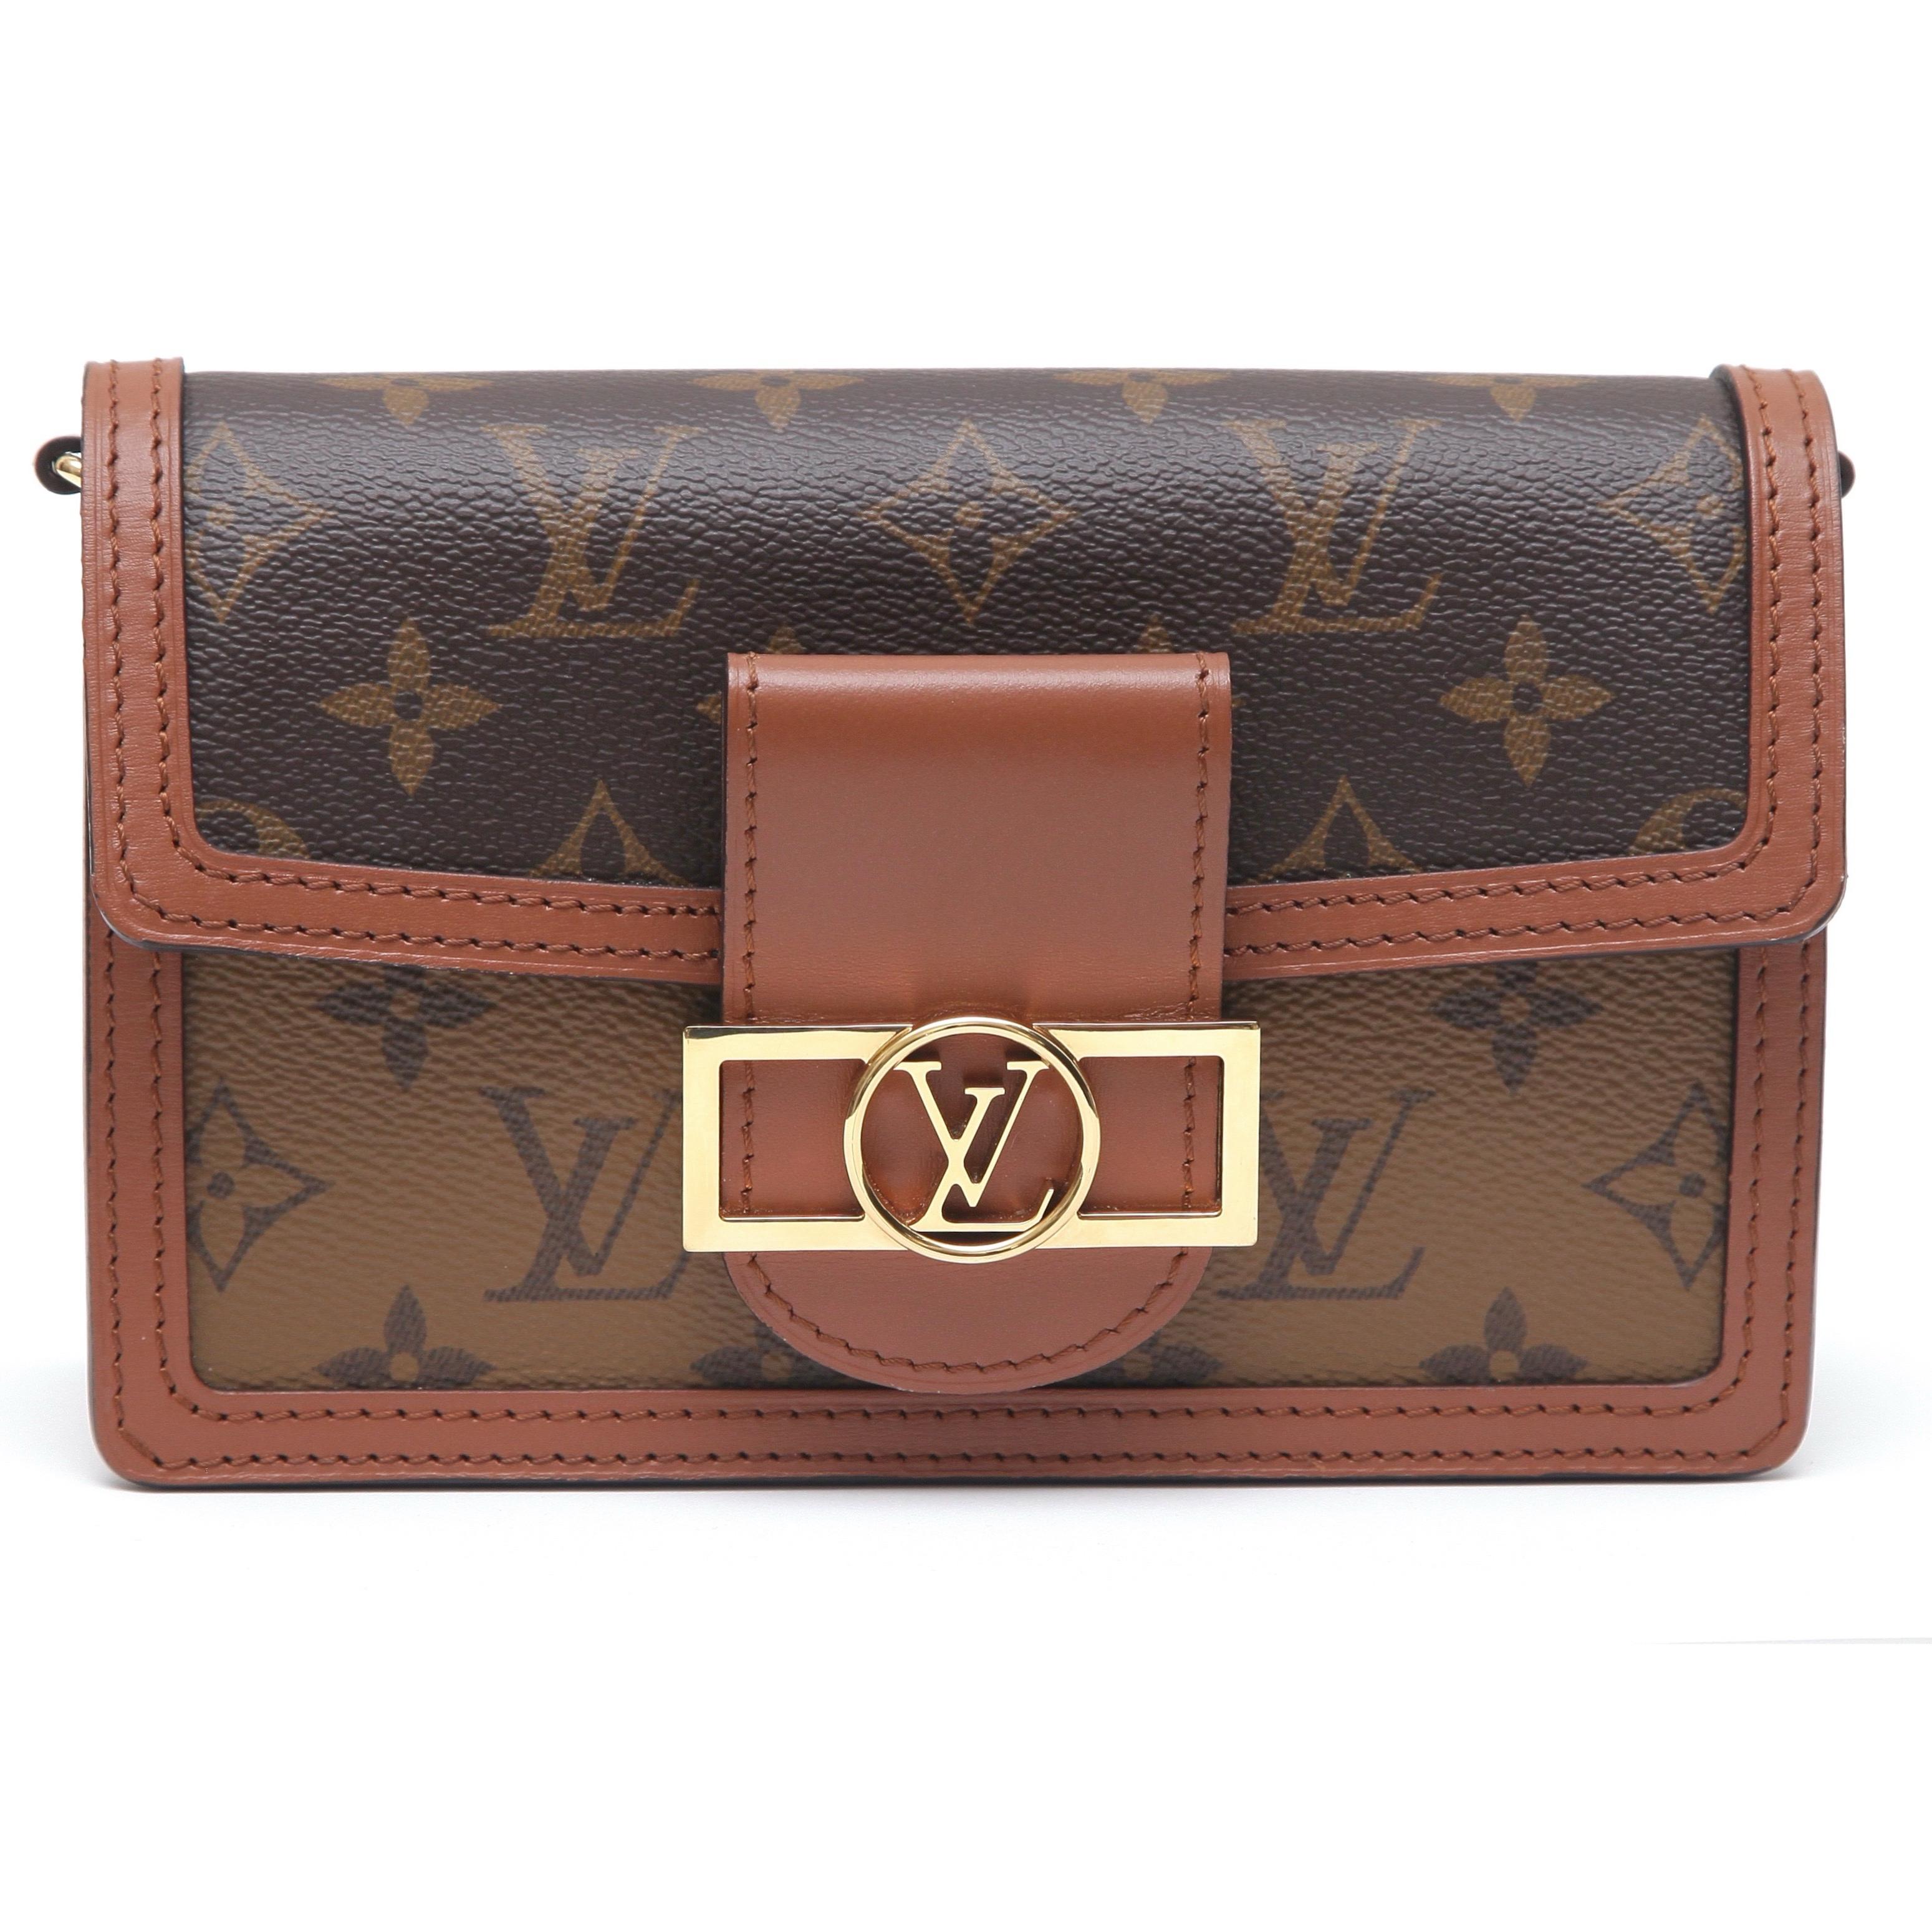 GUARANTEED AUTHENTIC LOUIS VUITTON DAUPHINE CHAIN WALLET

Details:
- Monogram and monogram reverse canvas.
- Leather trim.
- LV circle snap closure.
- Removable gold tone chain.
- Interior lined in black microfiber.
- Card slots.
- Signature found